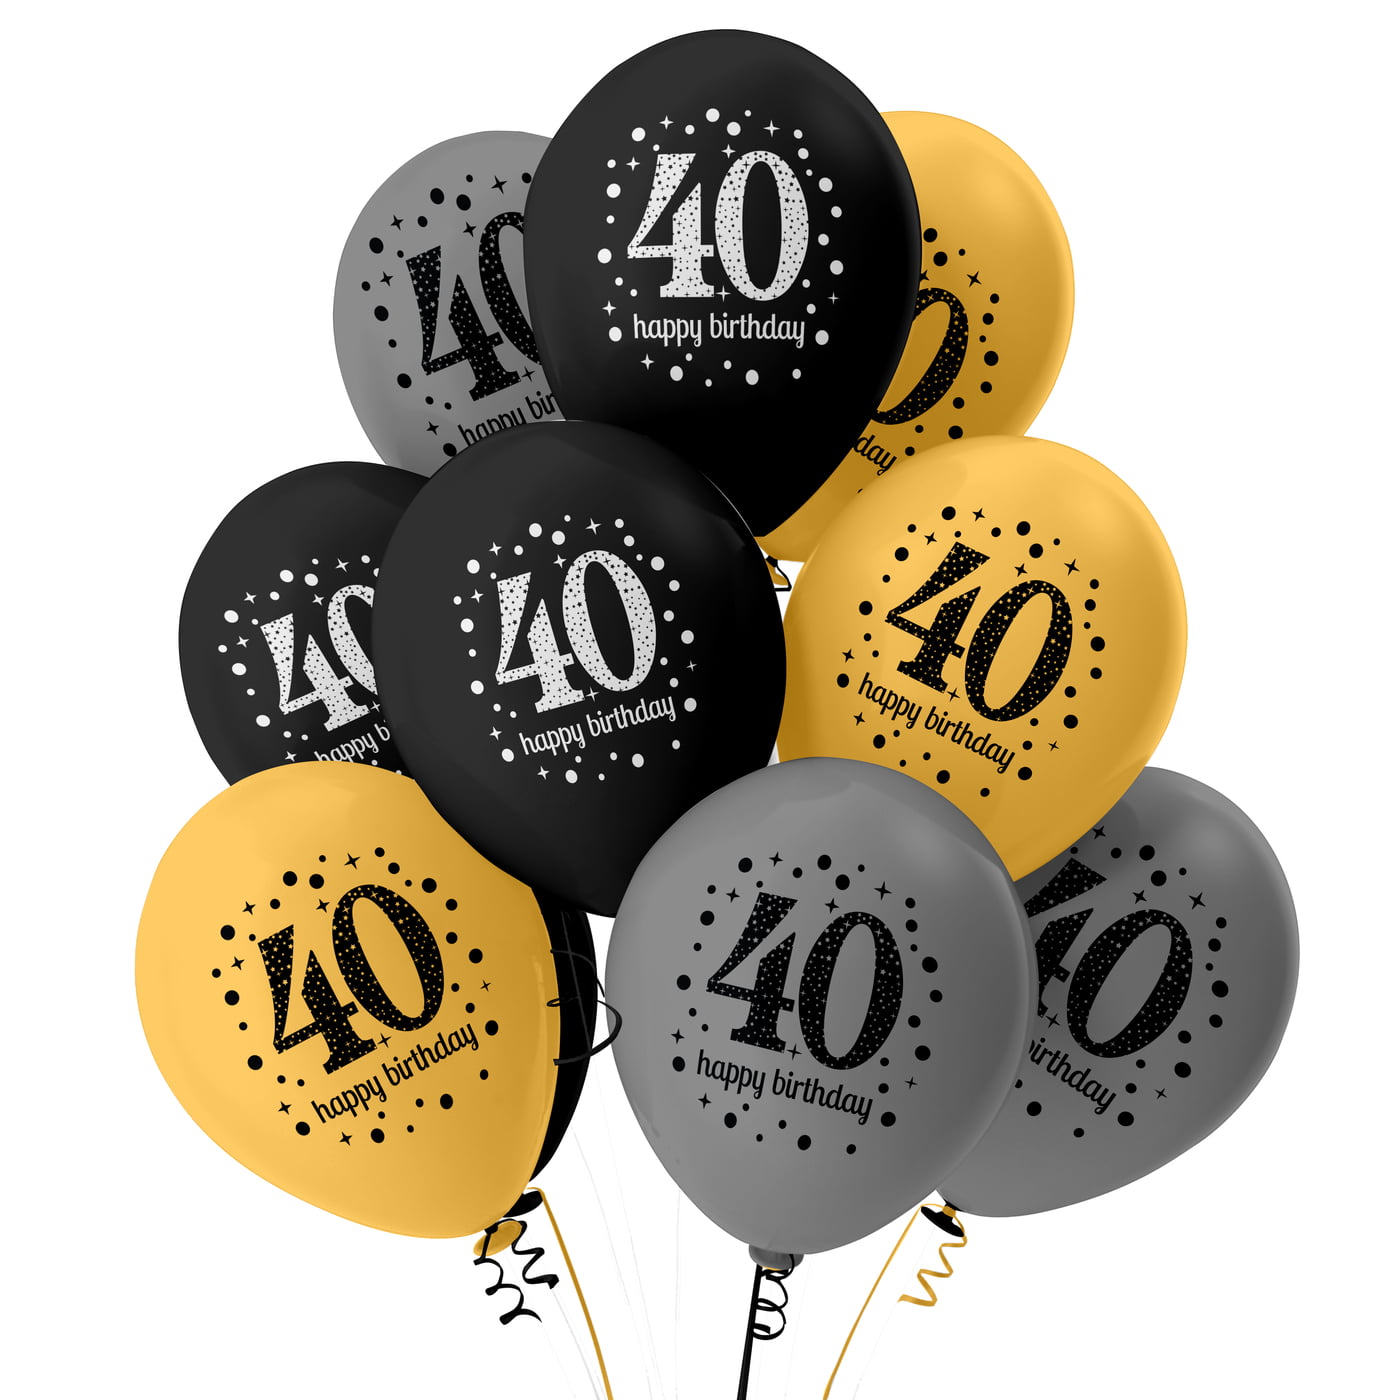 40th Birthday Balloons - Gold, Silver & Black Balloon Pack of 30 for Premium Decorations and Bouquet